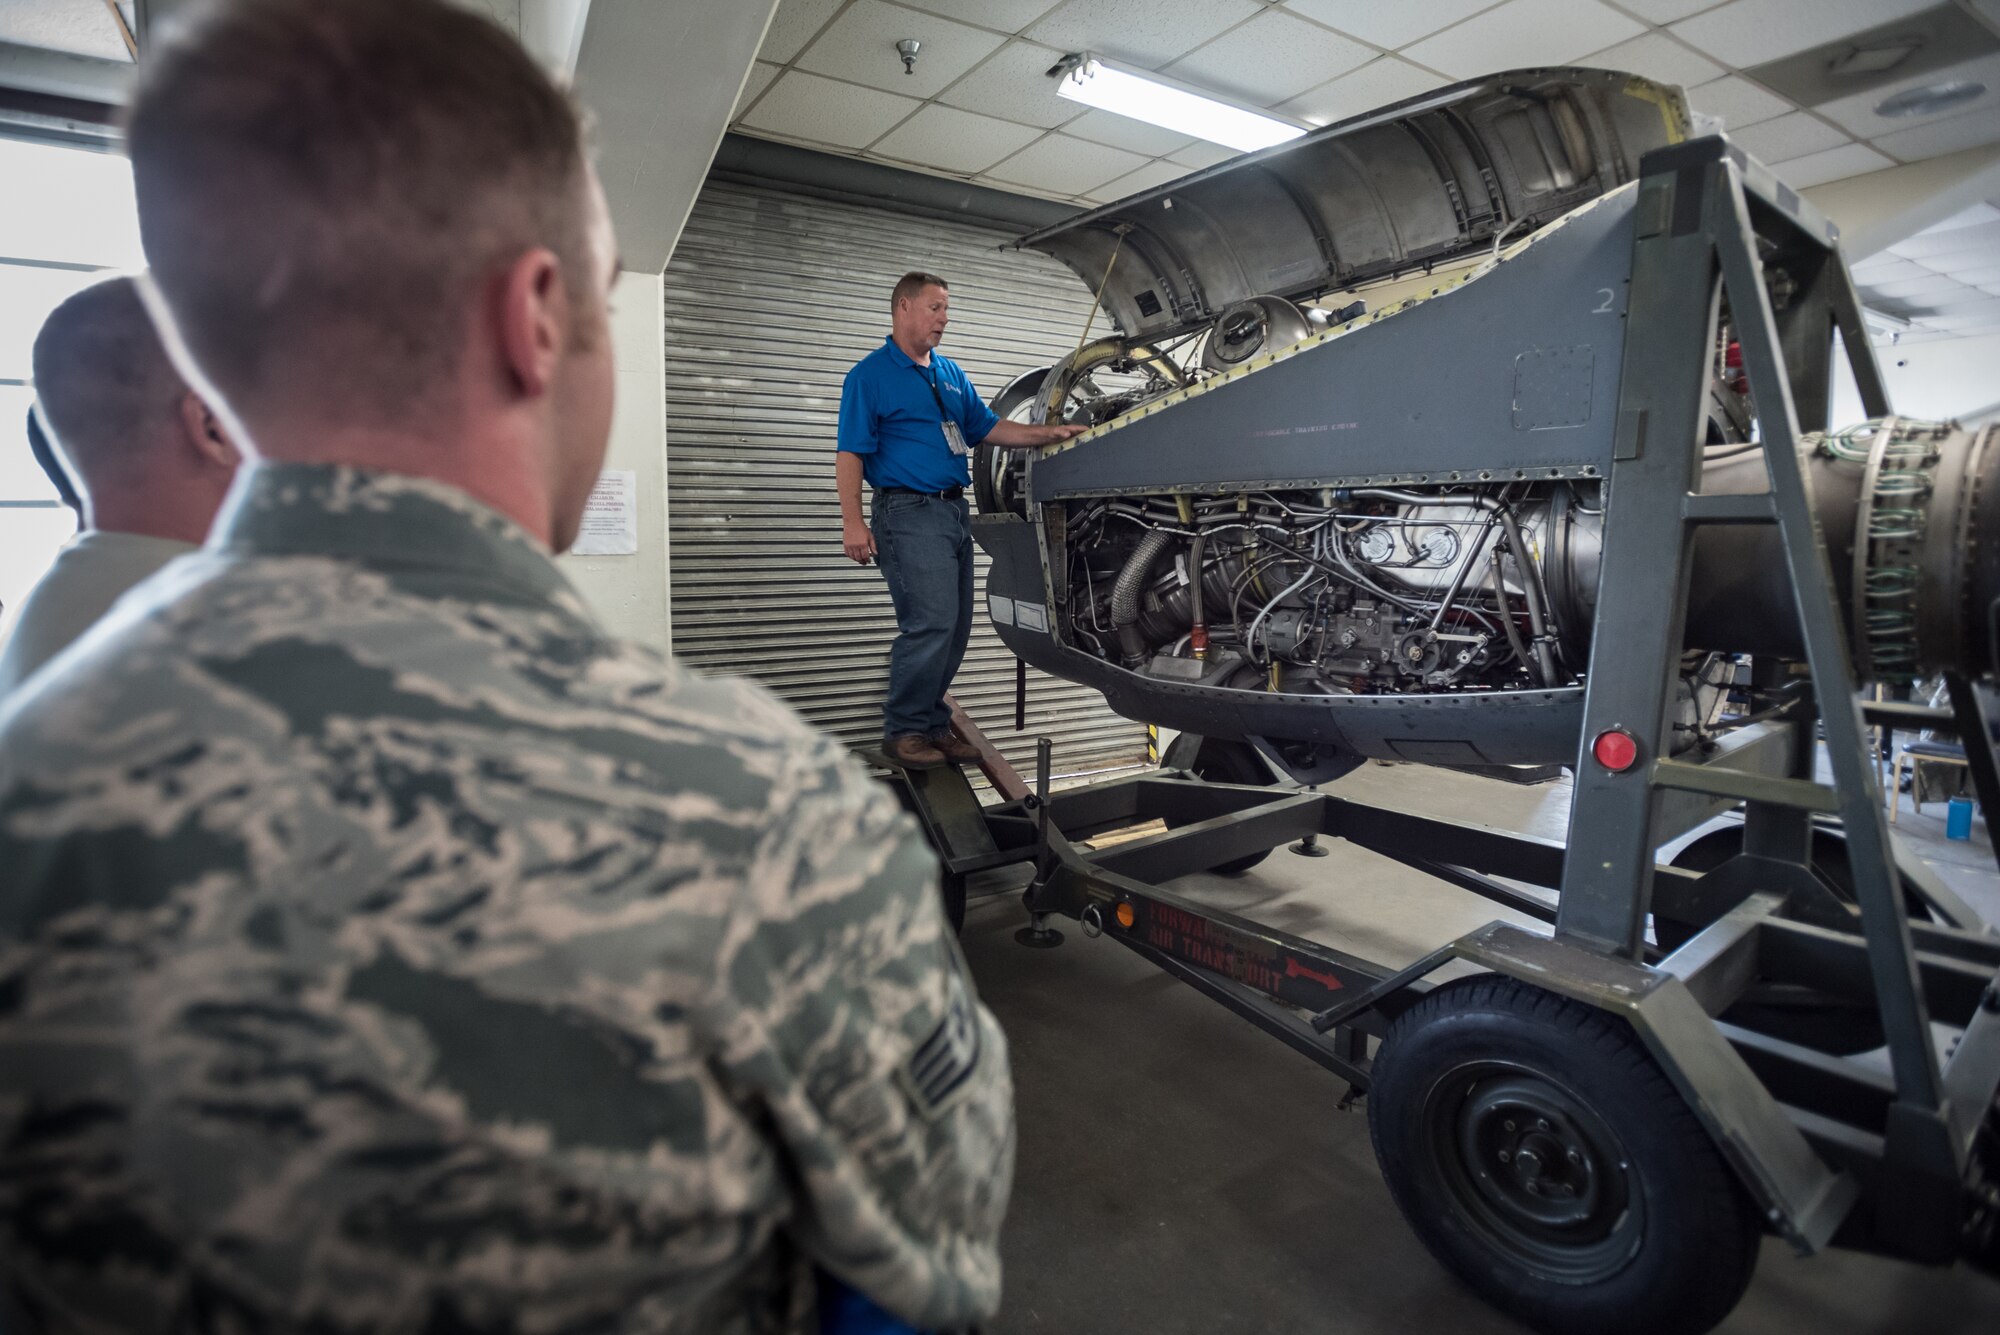 Roger Snow, a field service representative for Rolls-Royce Corp., teaches Airmen from the Connecticut, Kentucky, Montana and Missouri Air National Guard about the operation of C-130 engines during a class at the Air National Guard’s Air Dominance Center in Savannah, Ga., June 15, 2016. The class is part of Maintenance University here, a weeklong course designed to provide intensive instruction in aircraft maintenance. Now in its eighth year, Maintenance University is sponsored by the 123rd Airlift Wing. (U.S. Air National Guard photo by Lt. Col. Dale Greer)